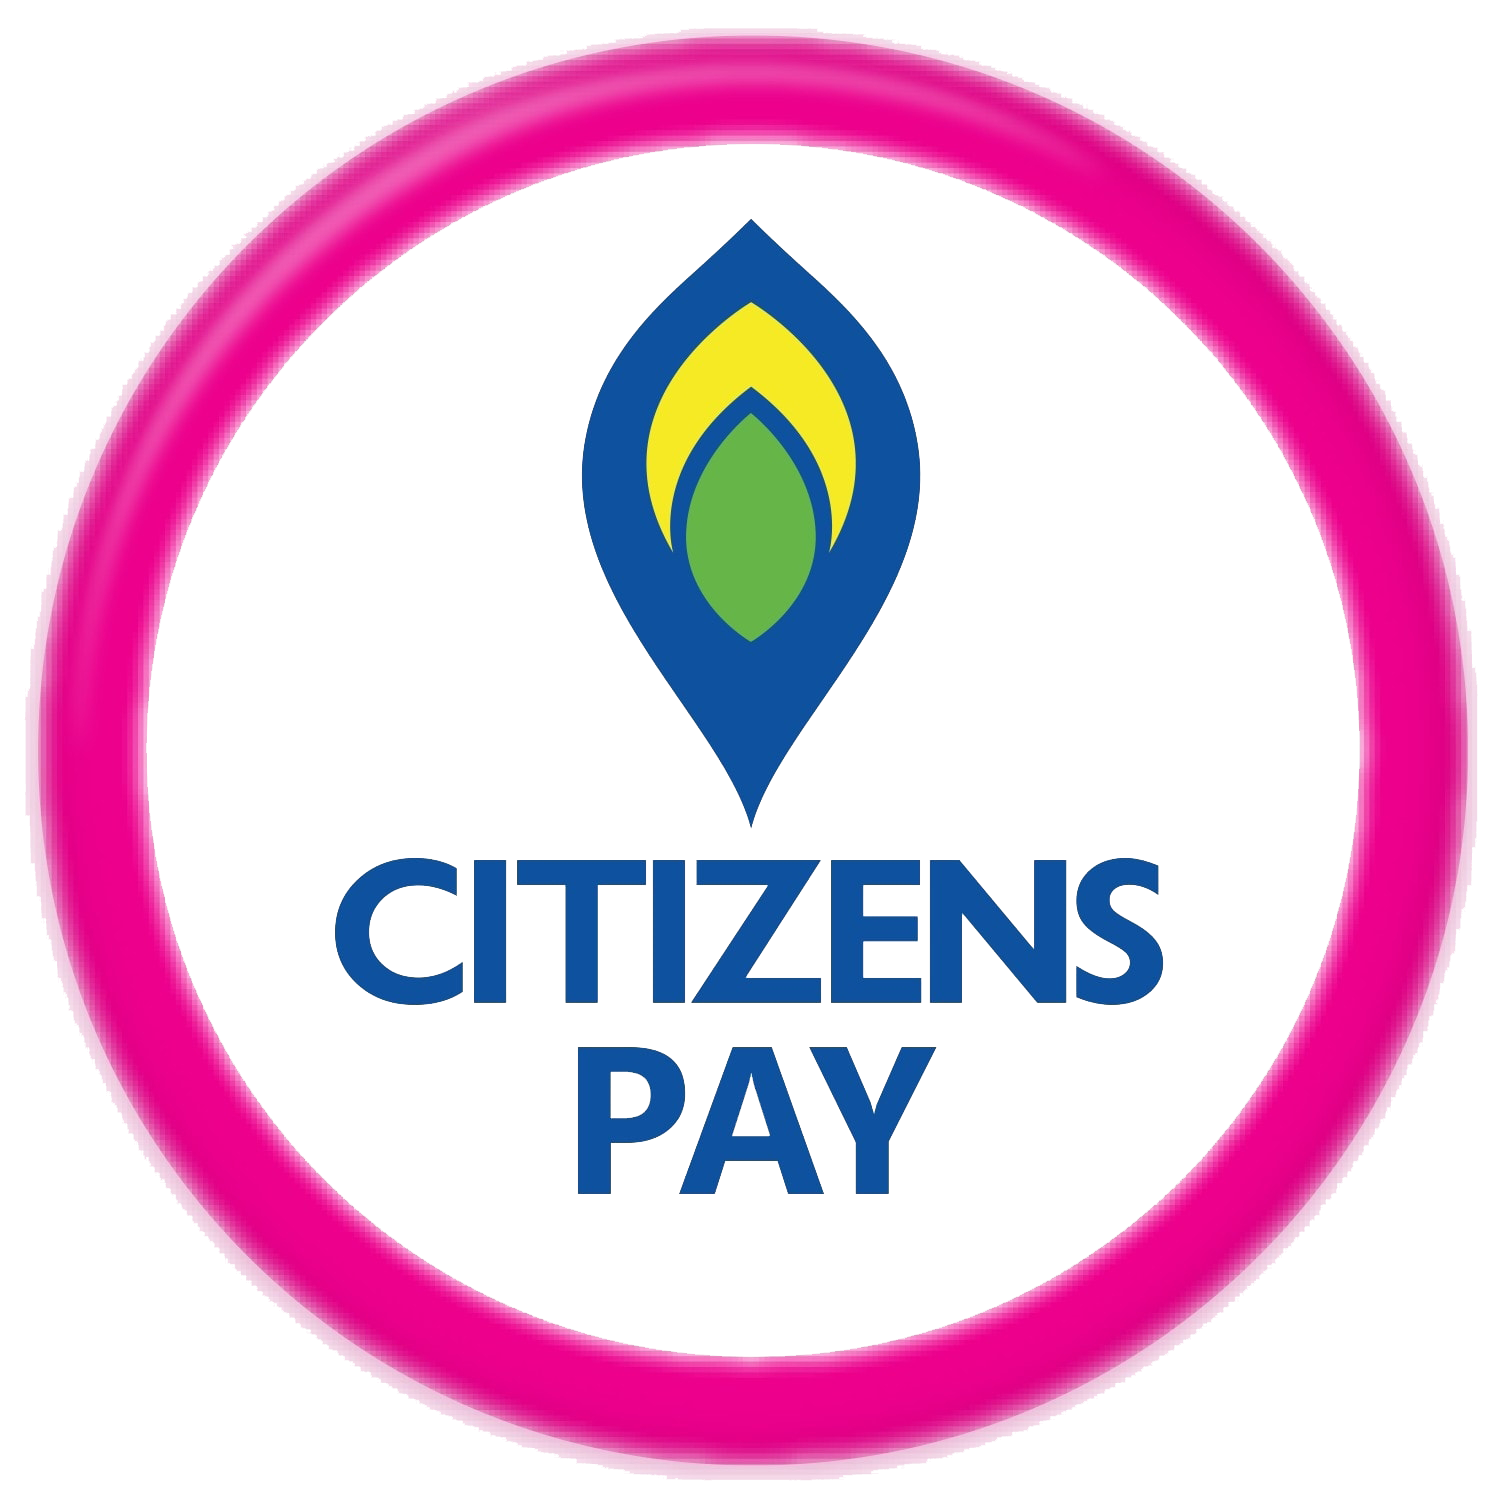 CITIZENS PAY